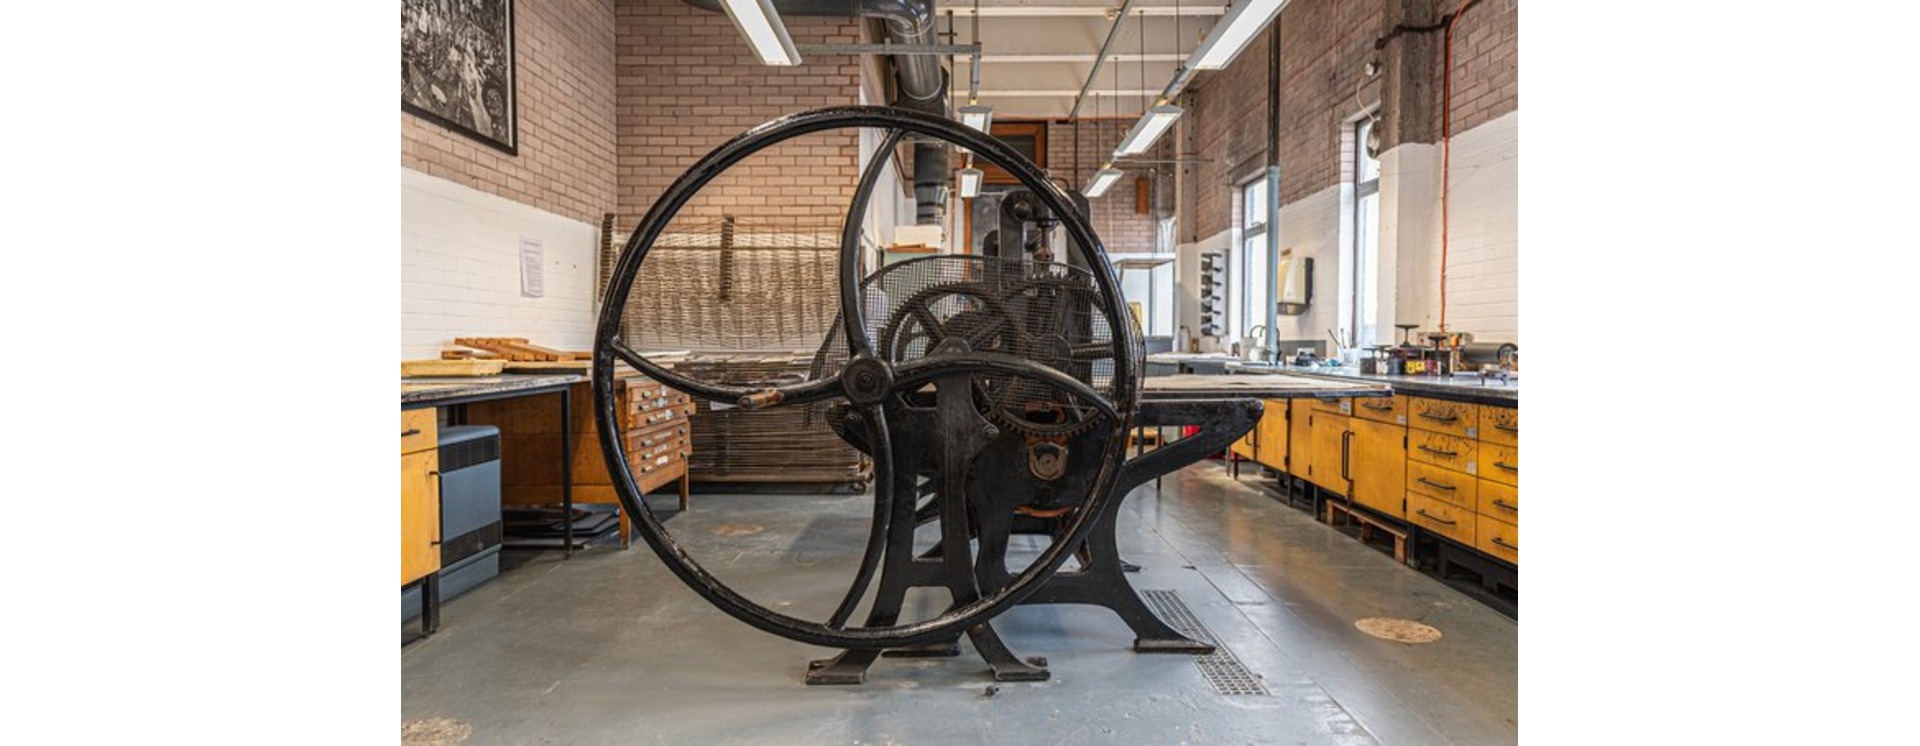 The centrepiece of Start the Press! is an antique, flatbed printing press from Wolverhampton School of Art.